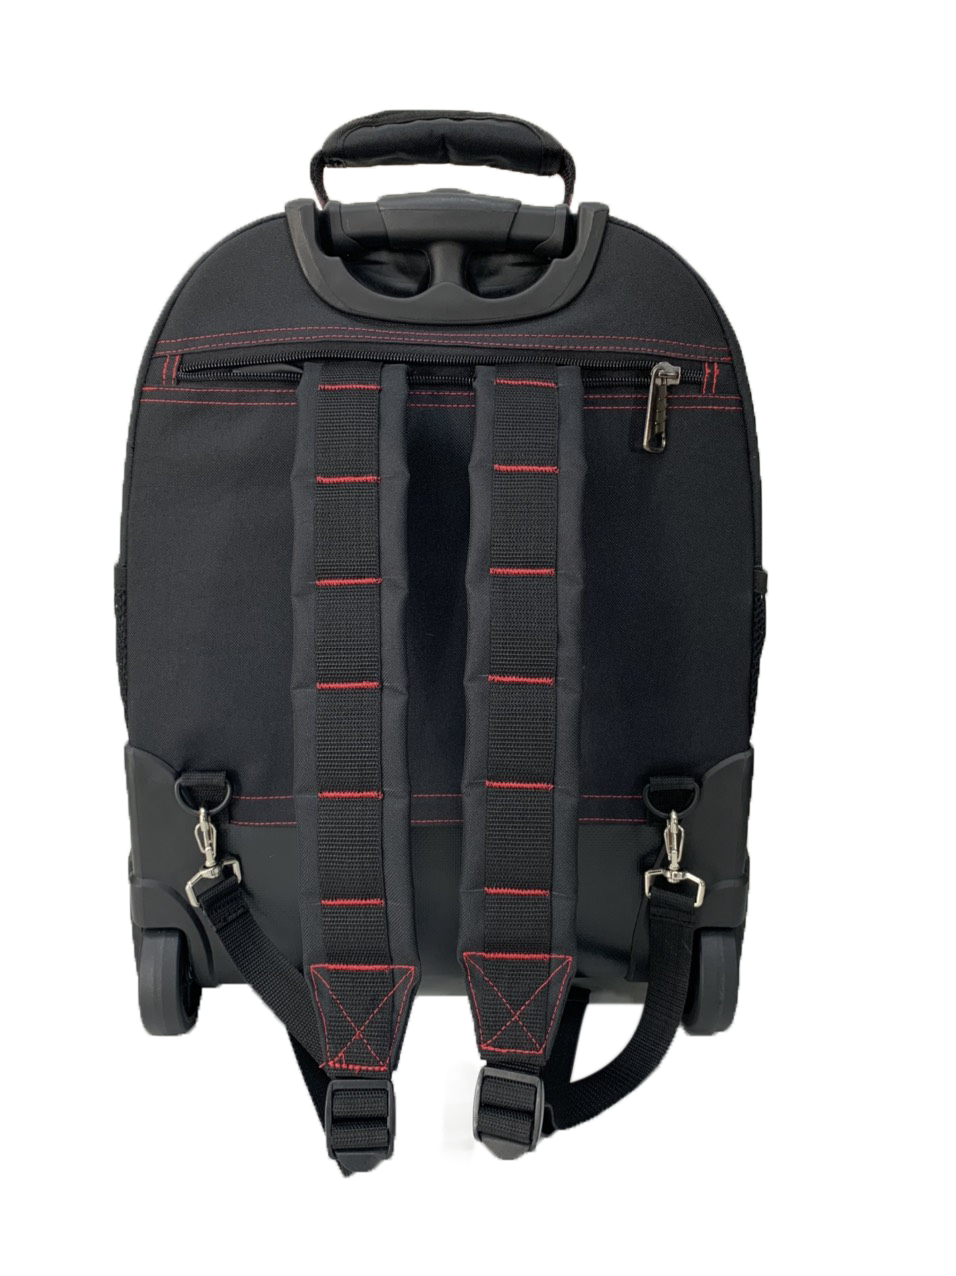  Reasonable Price Polyester Carrying Protector Custom Ista Standard Brake Tooling Backpack 37cm Made In Vietnam Manufacturer 5